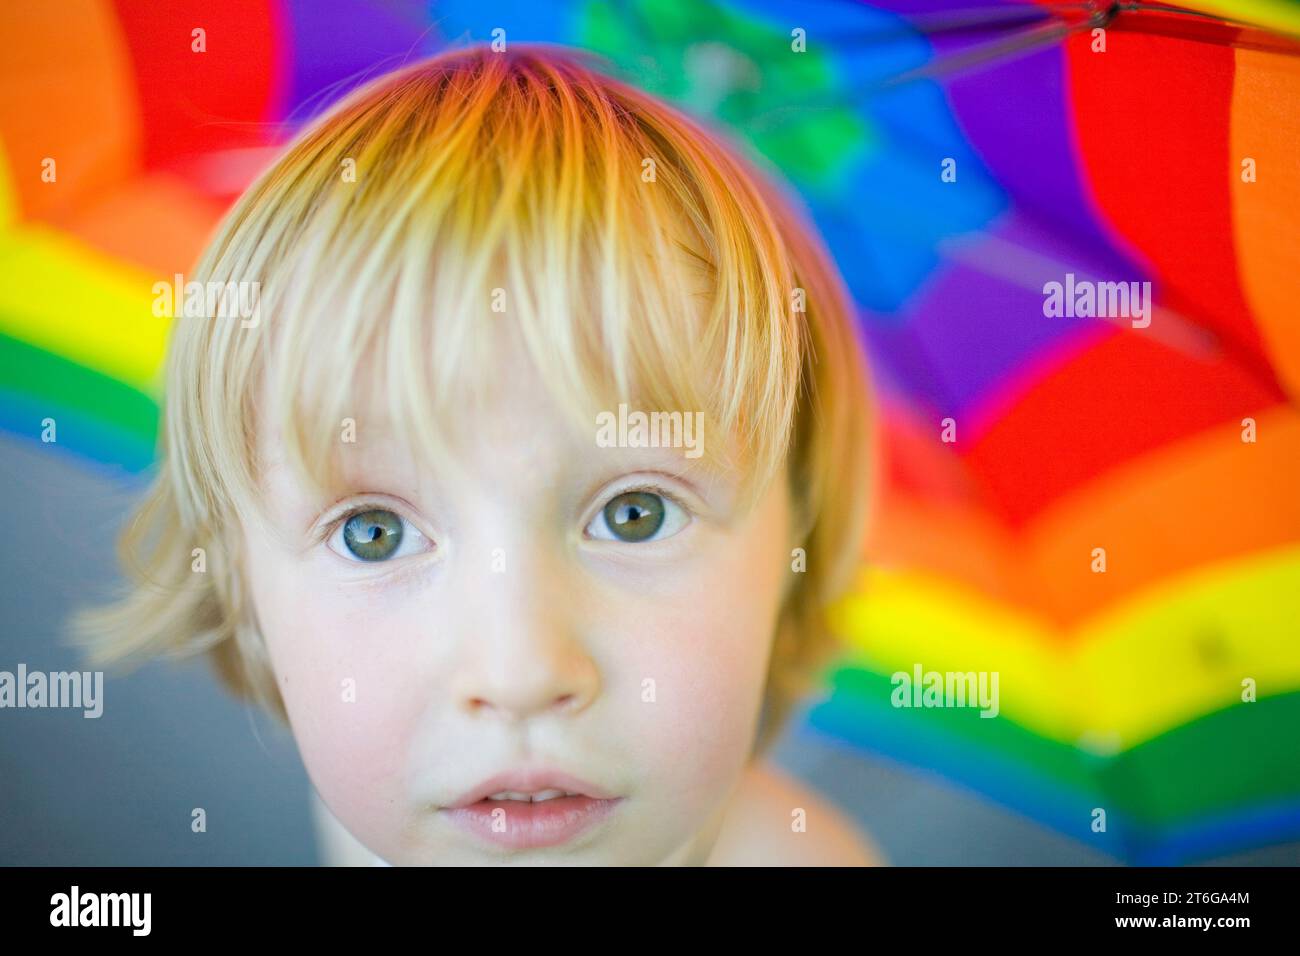 A blond-haired boy under a luminescent, rainbow-colored umbrella. Stock Photo